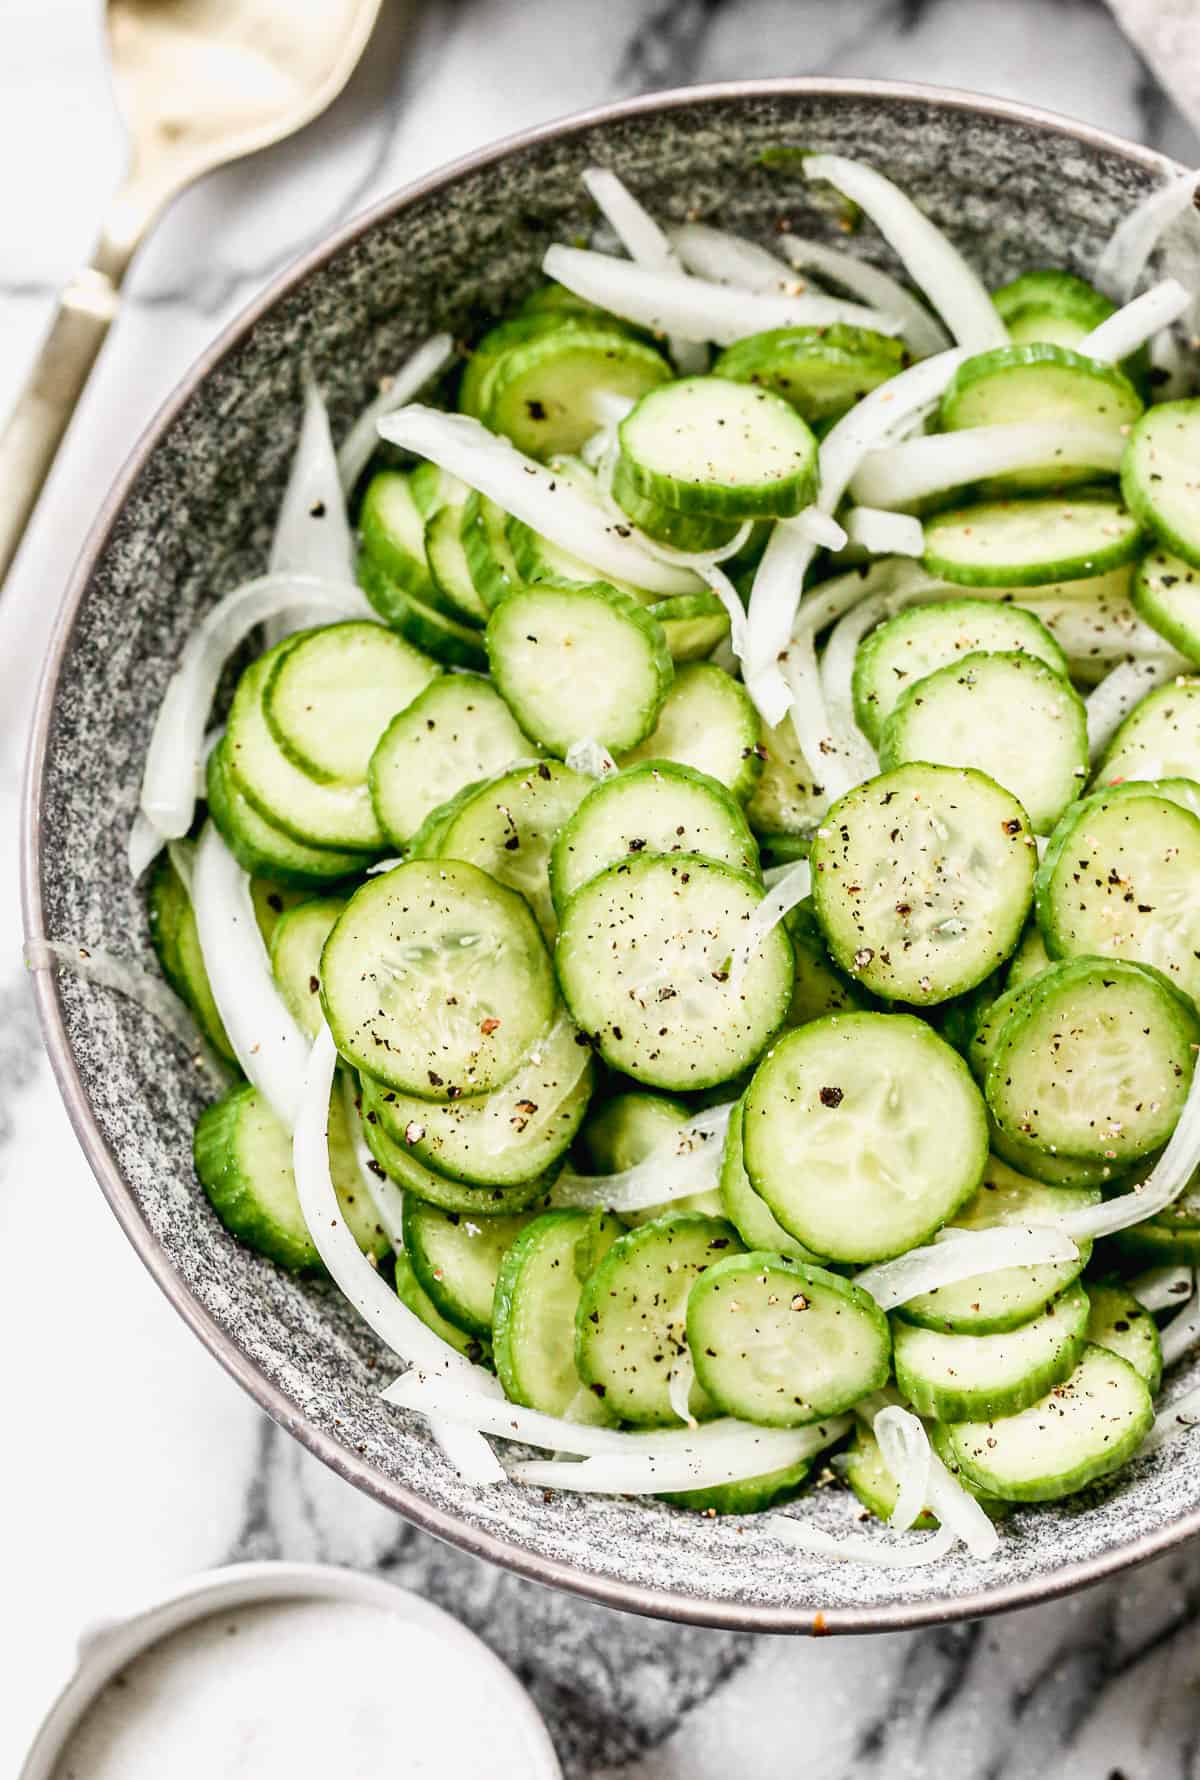 Easy cucumber and onion salad in a bowl.